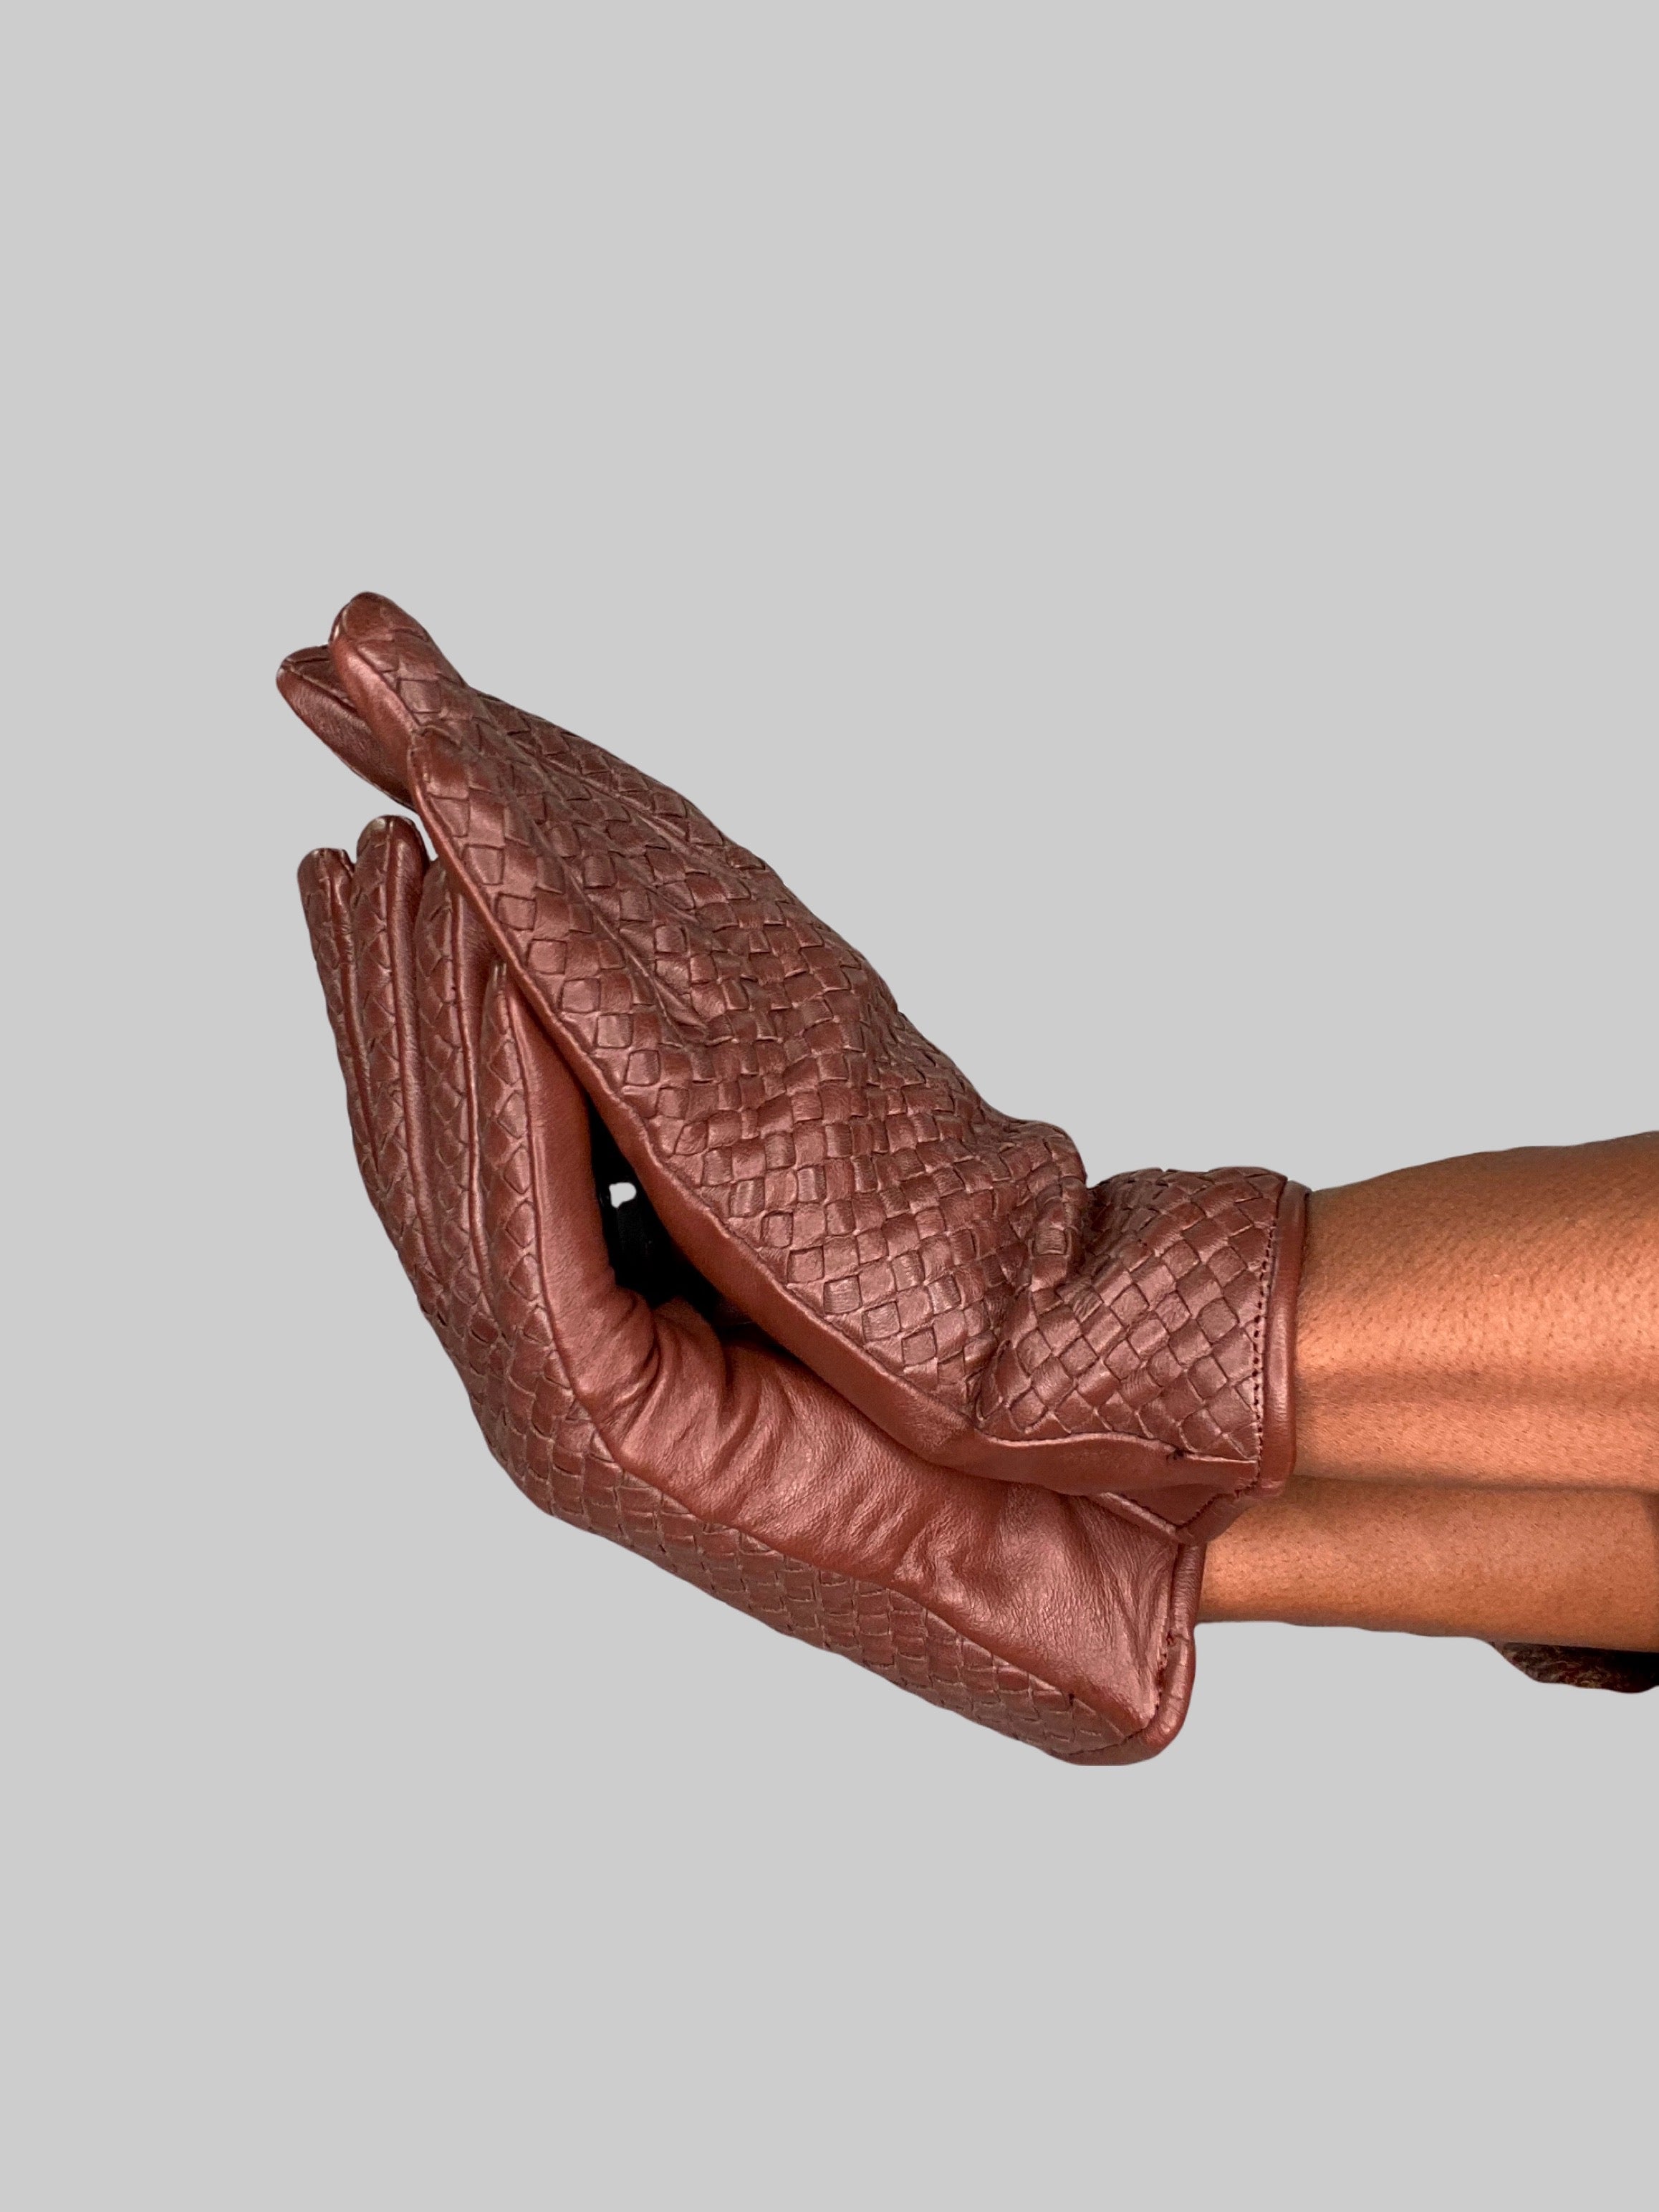 Brown Leather Woven Gloves